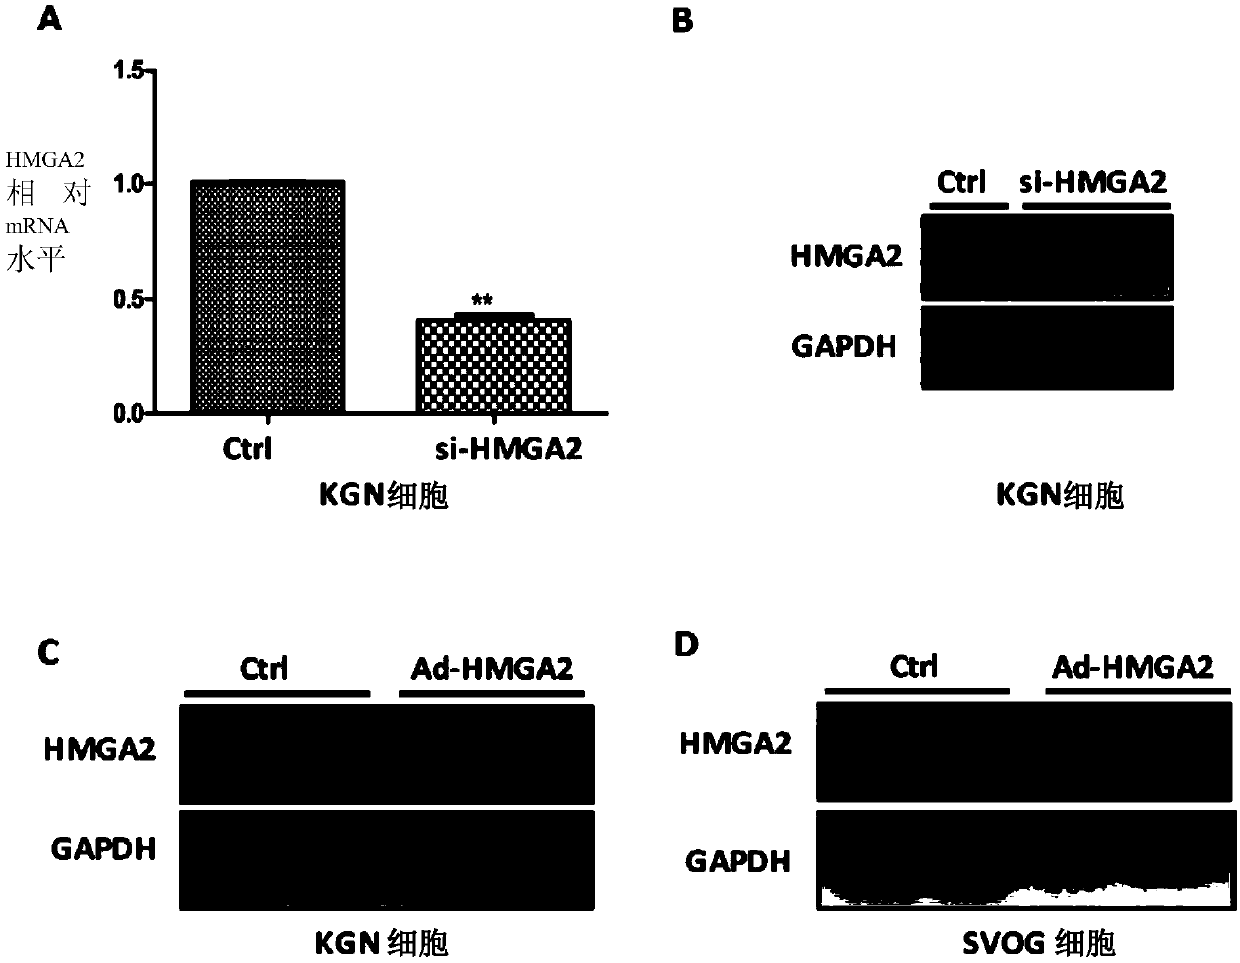 Application of HMGA2 gene in polycystic ovary syndrome disease